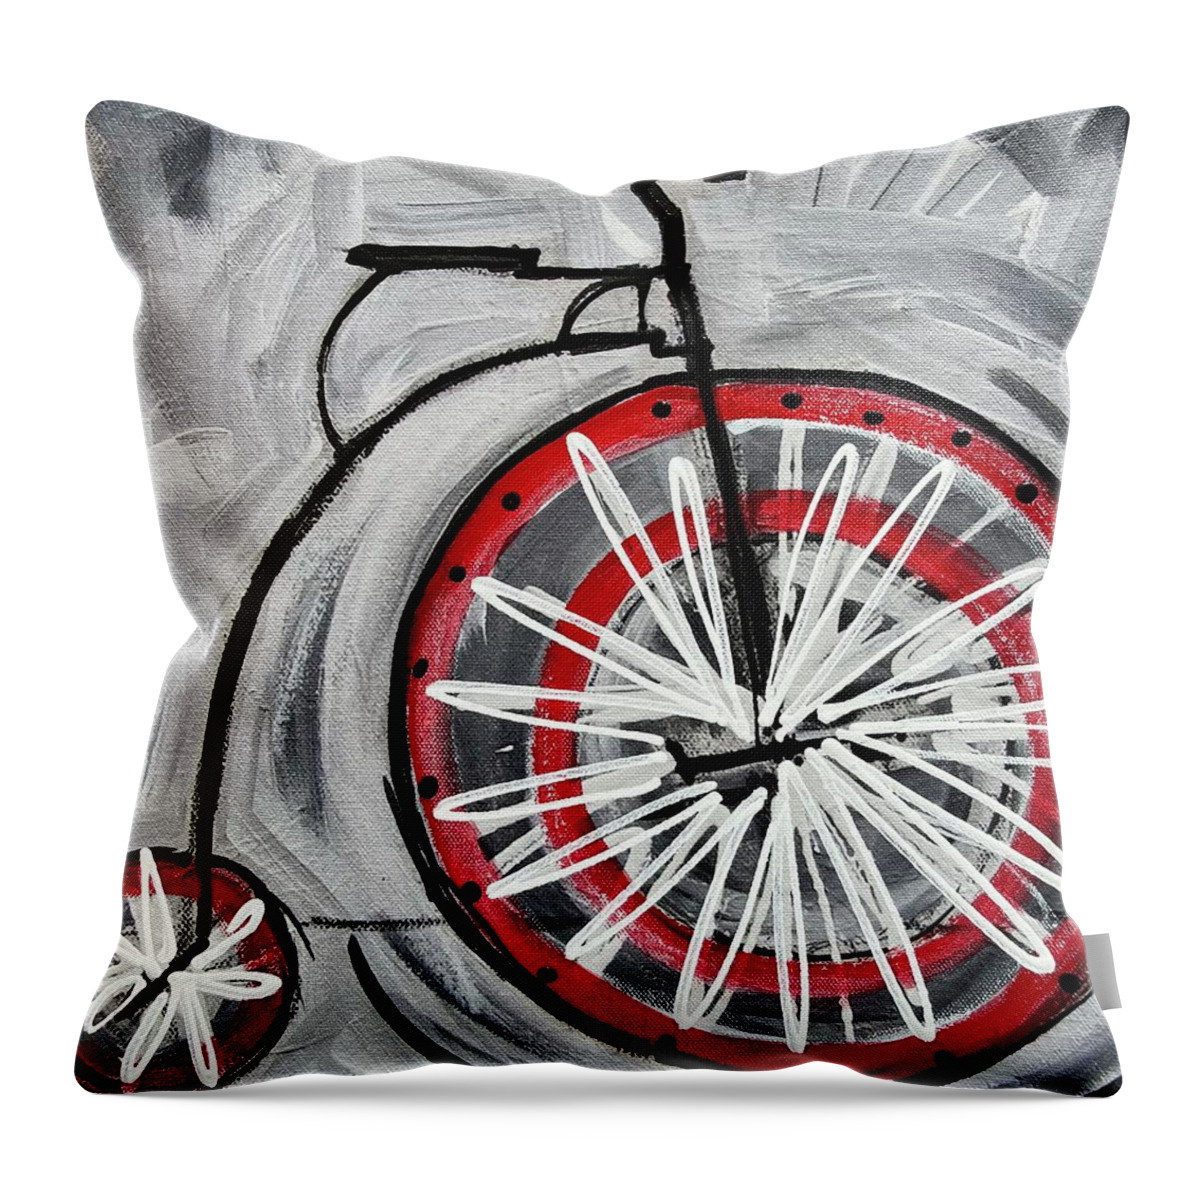  Throw Pillow featuring the painting Spot On #1 by Judy Rogan